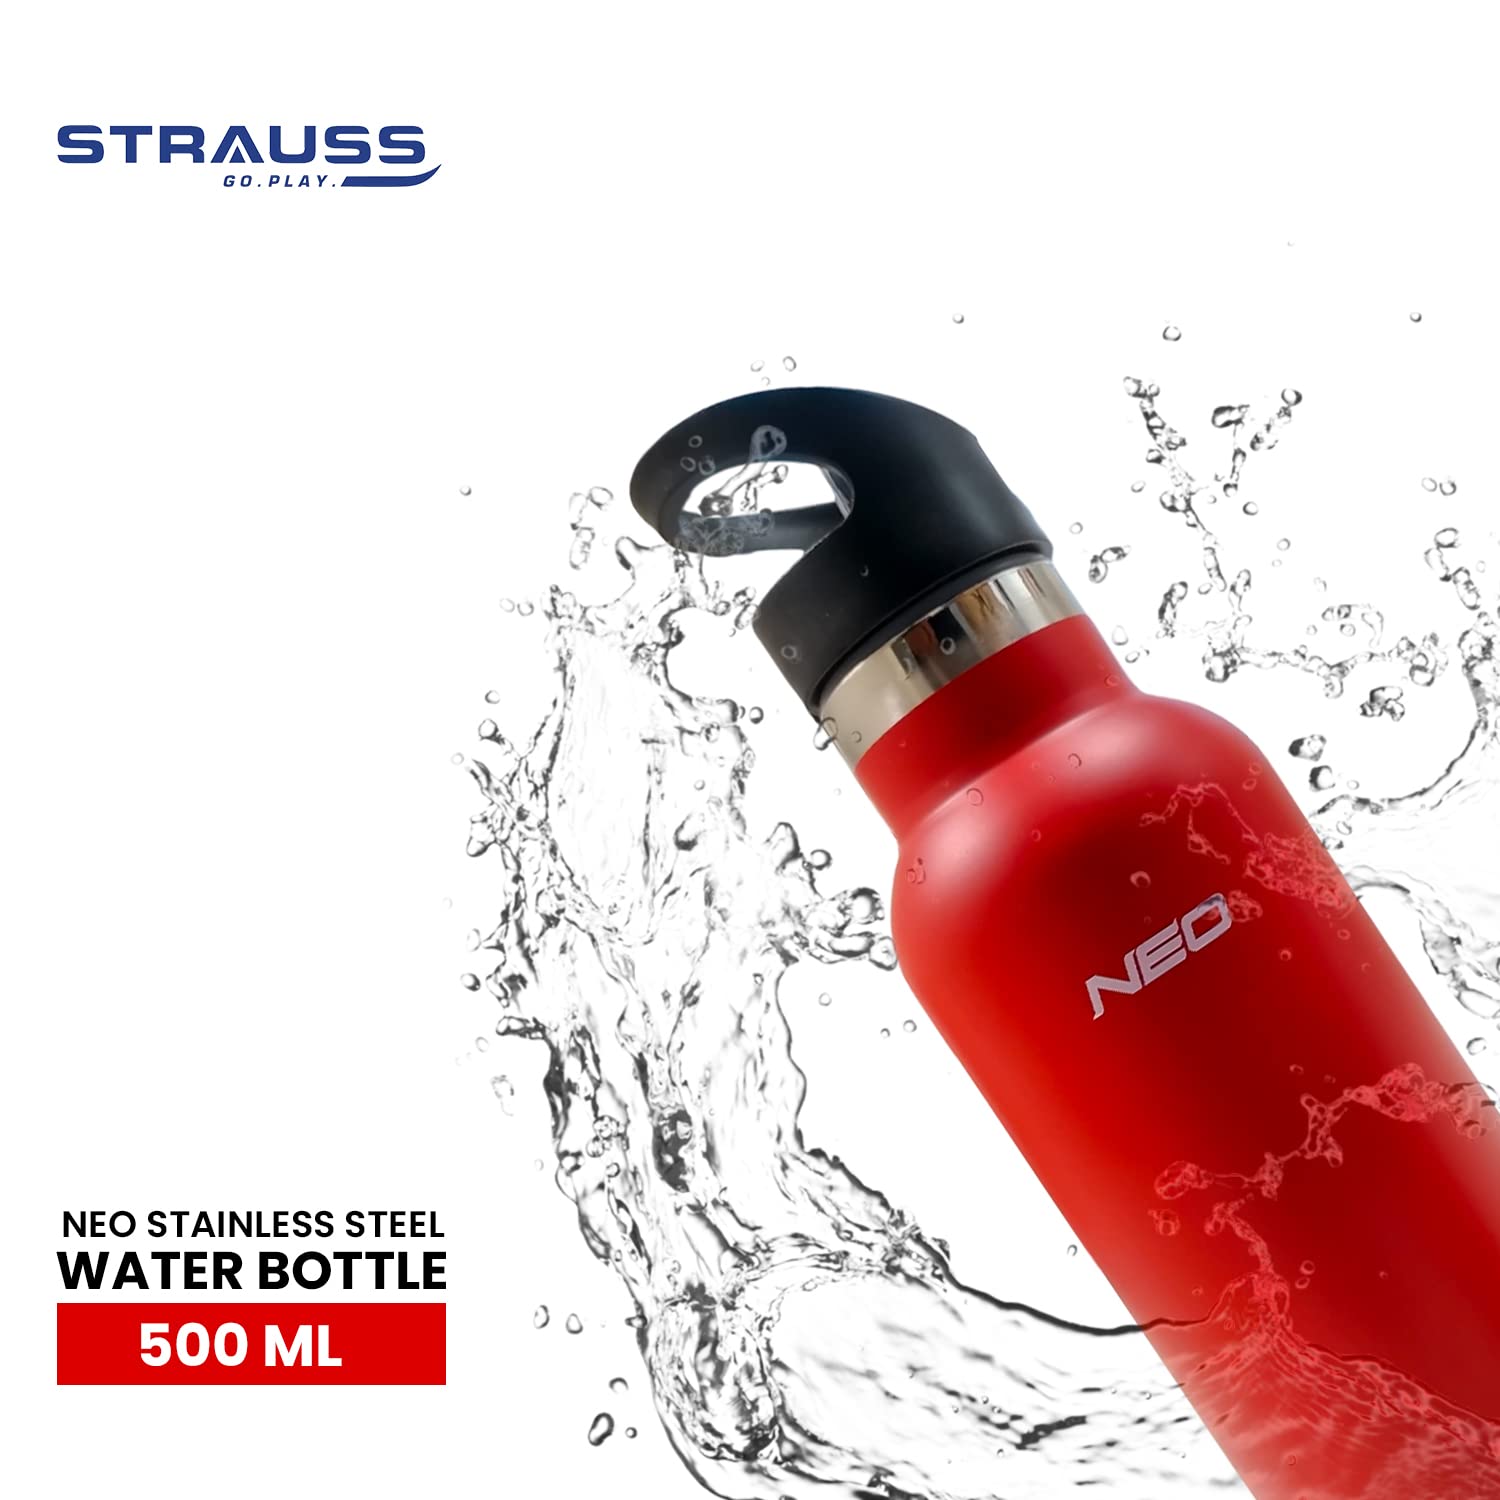 Strauss Neo Stainless Steel Water Bottle | Ideal for Gym, Home, Office, Sports, Kitchen &Travel | Leak Proof & Rust Free, 500 ml (Red)